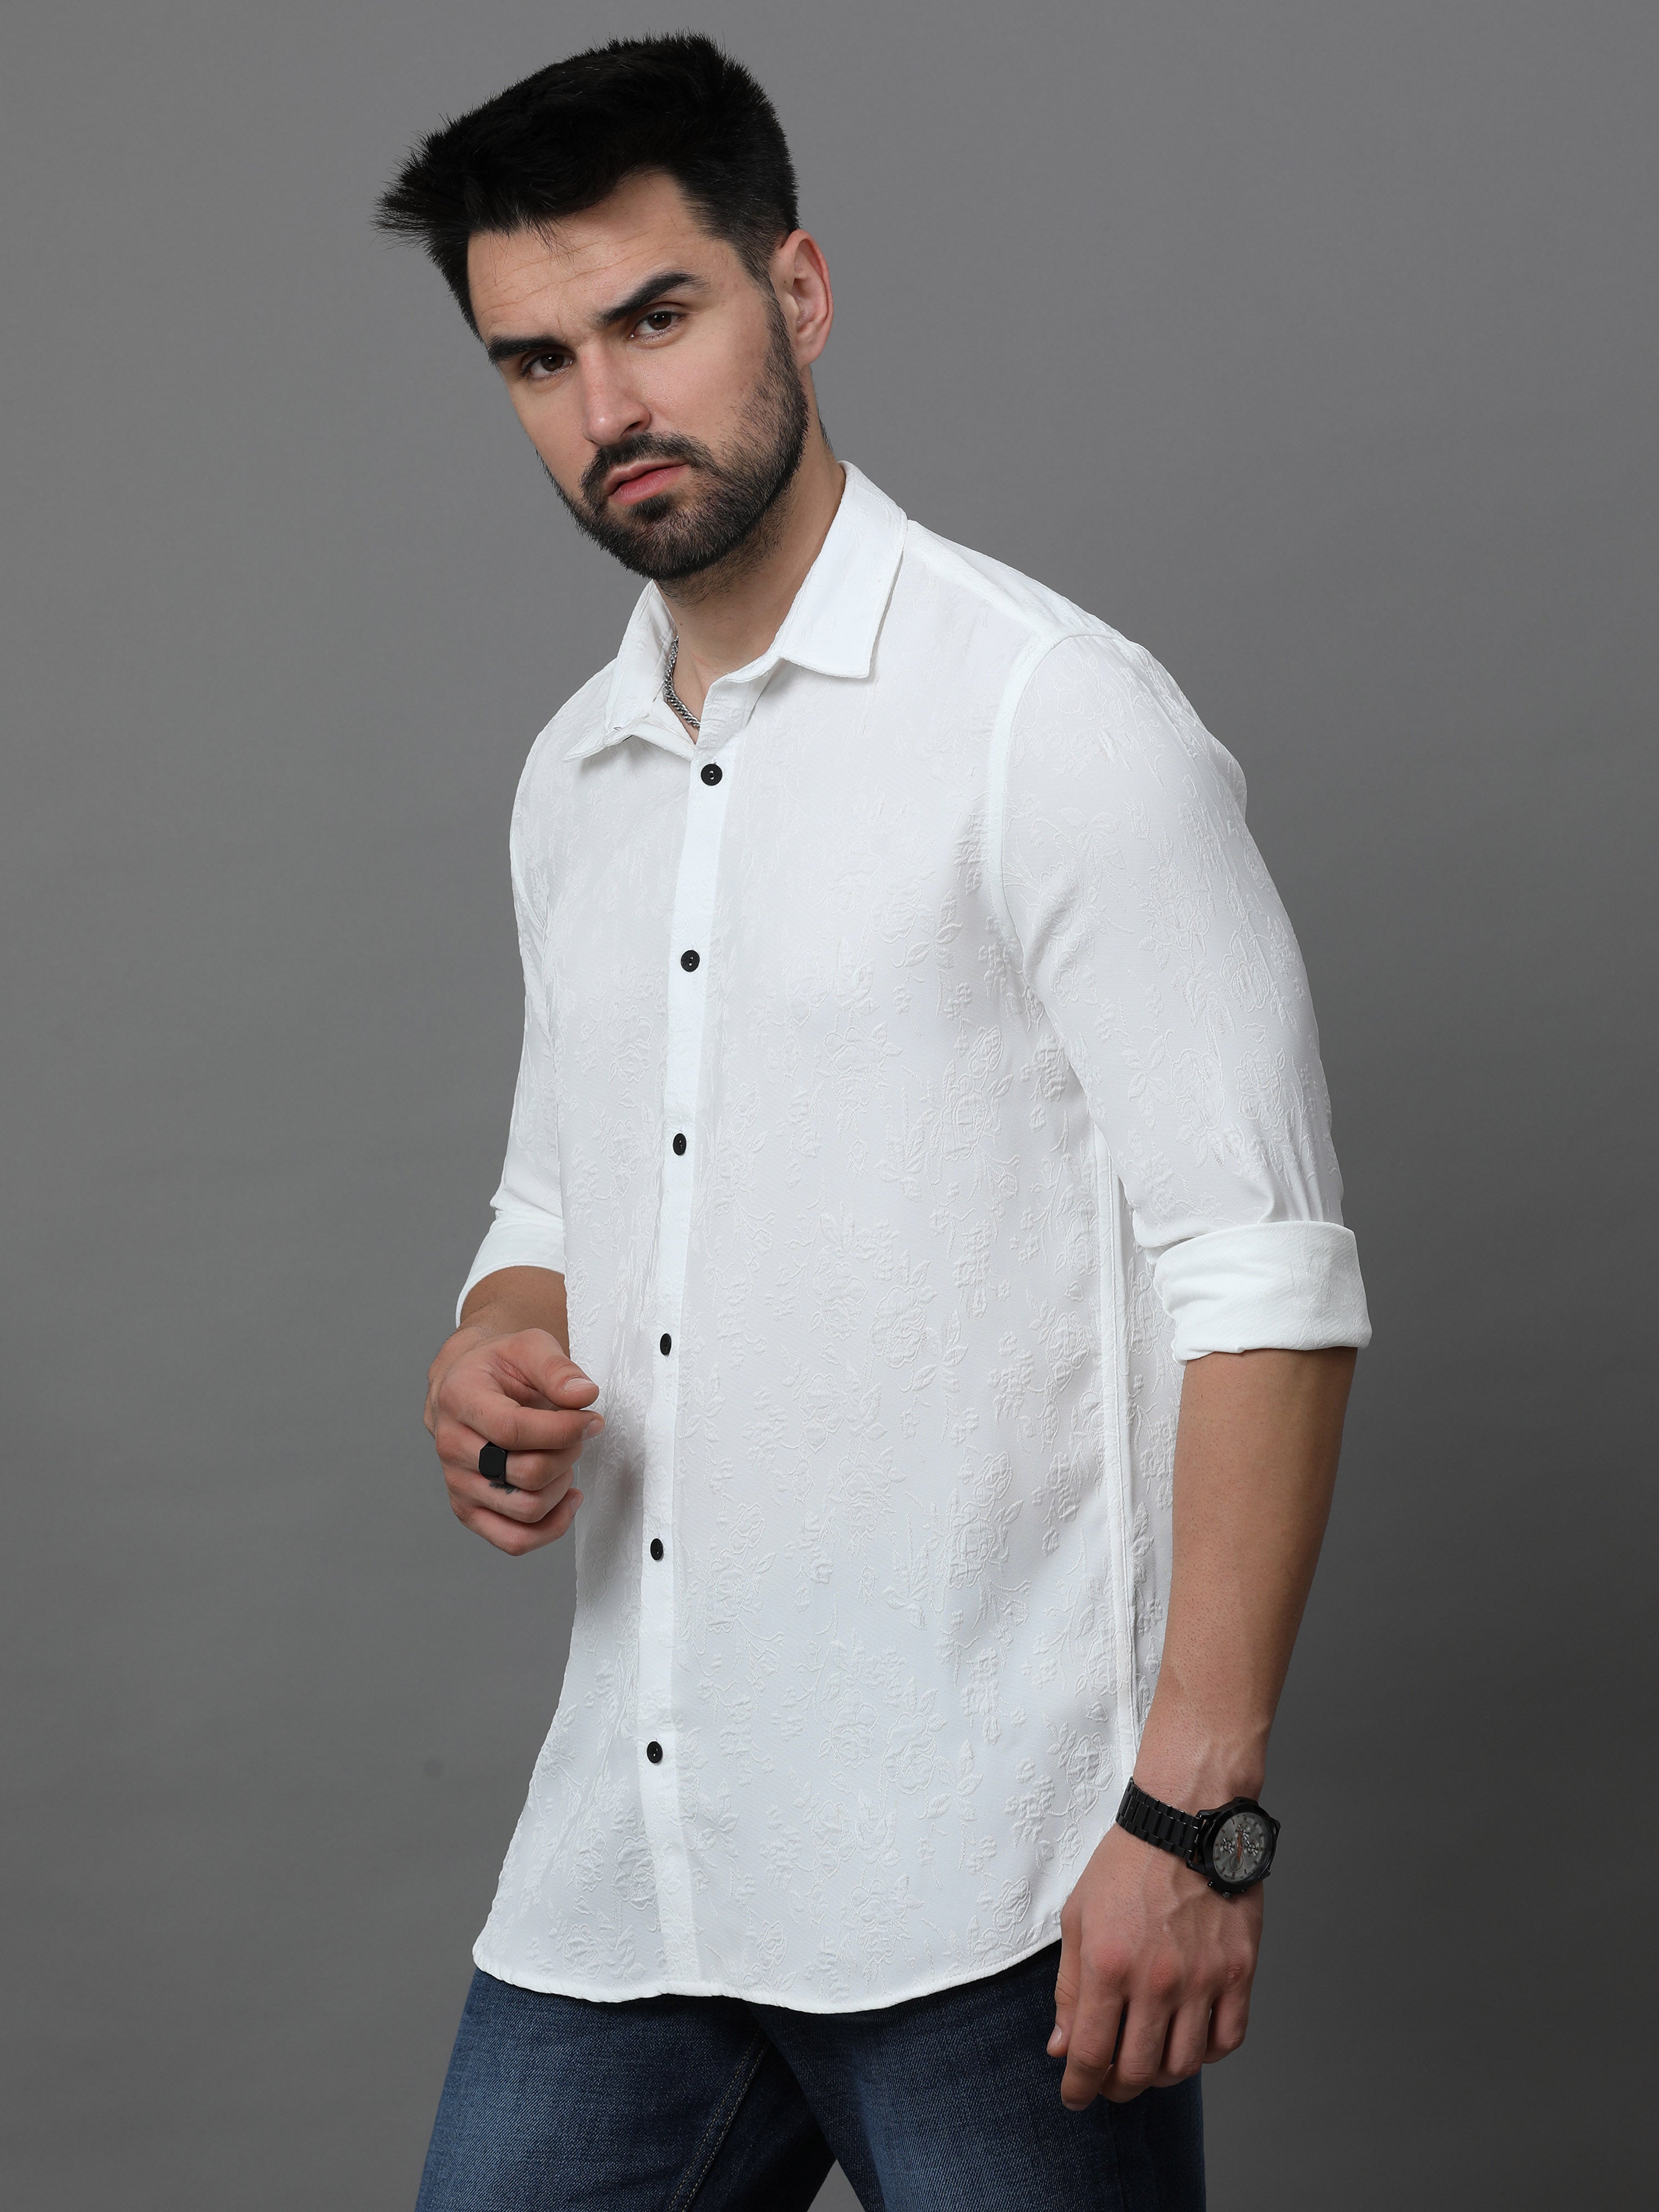 Exquisite Sophistication: White Floret Design Shirts with Imported